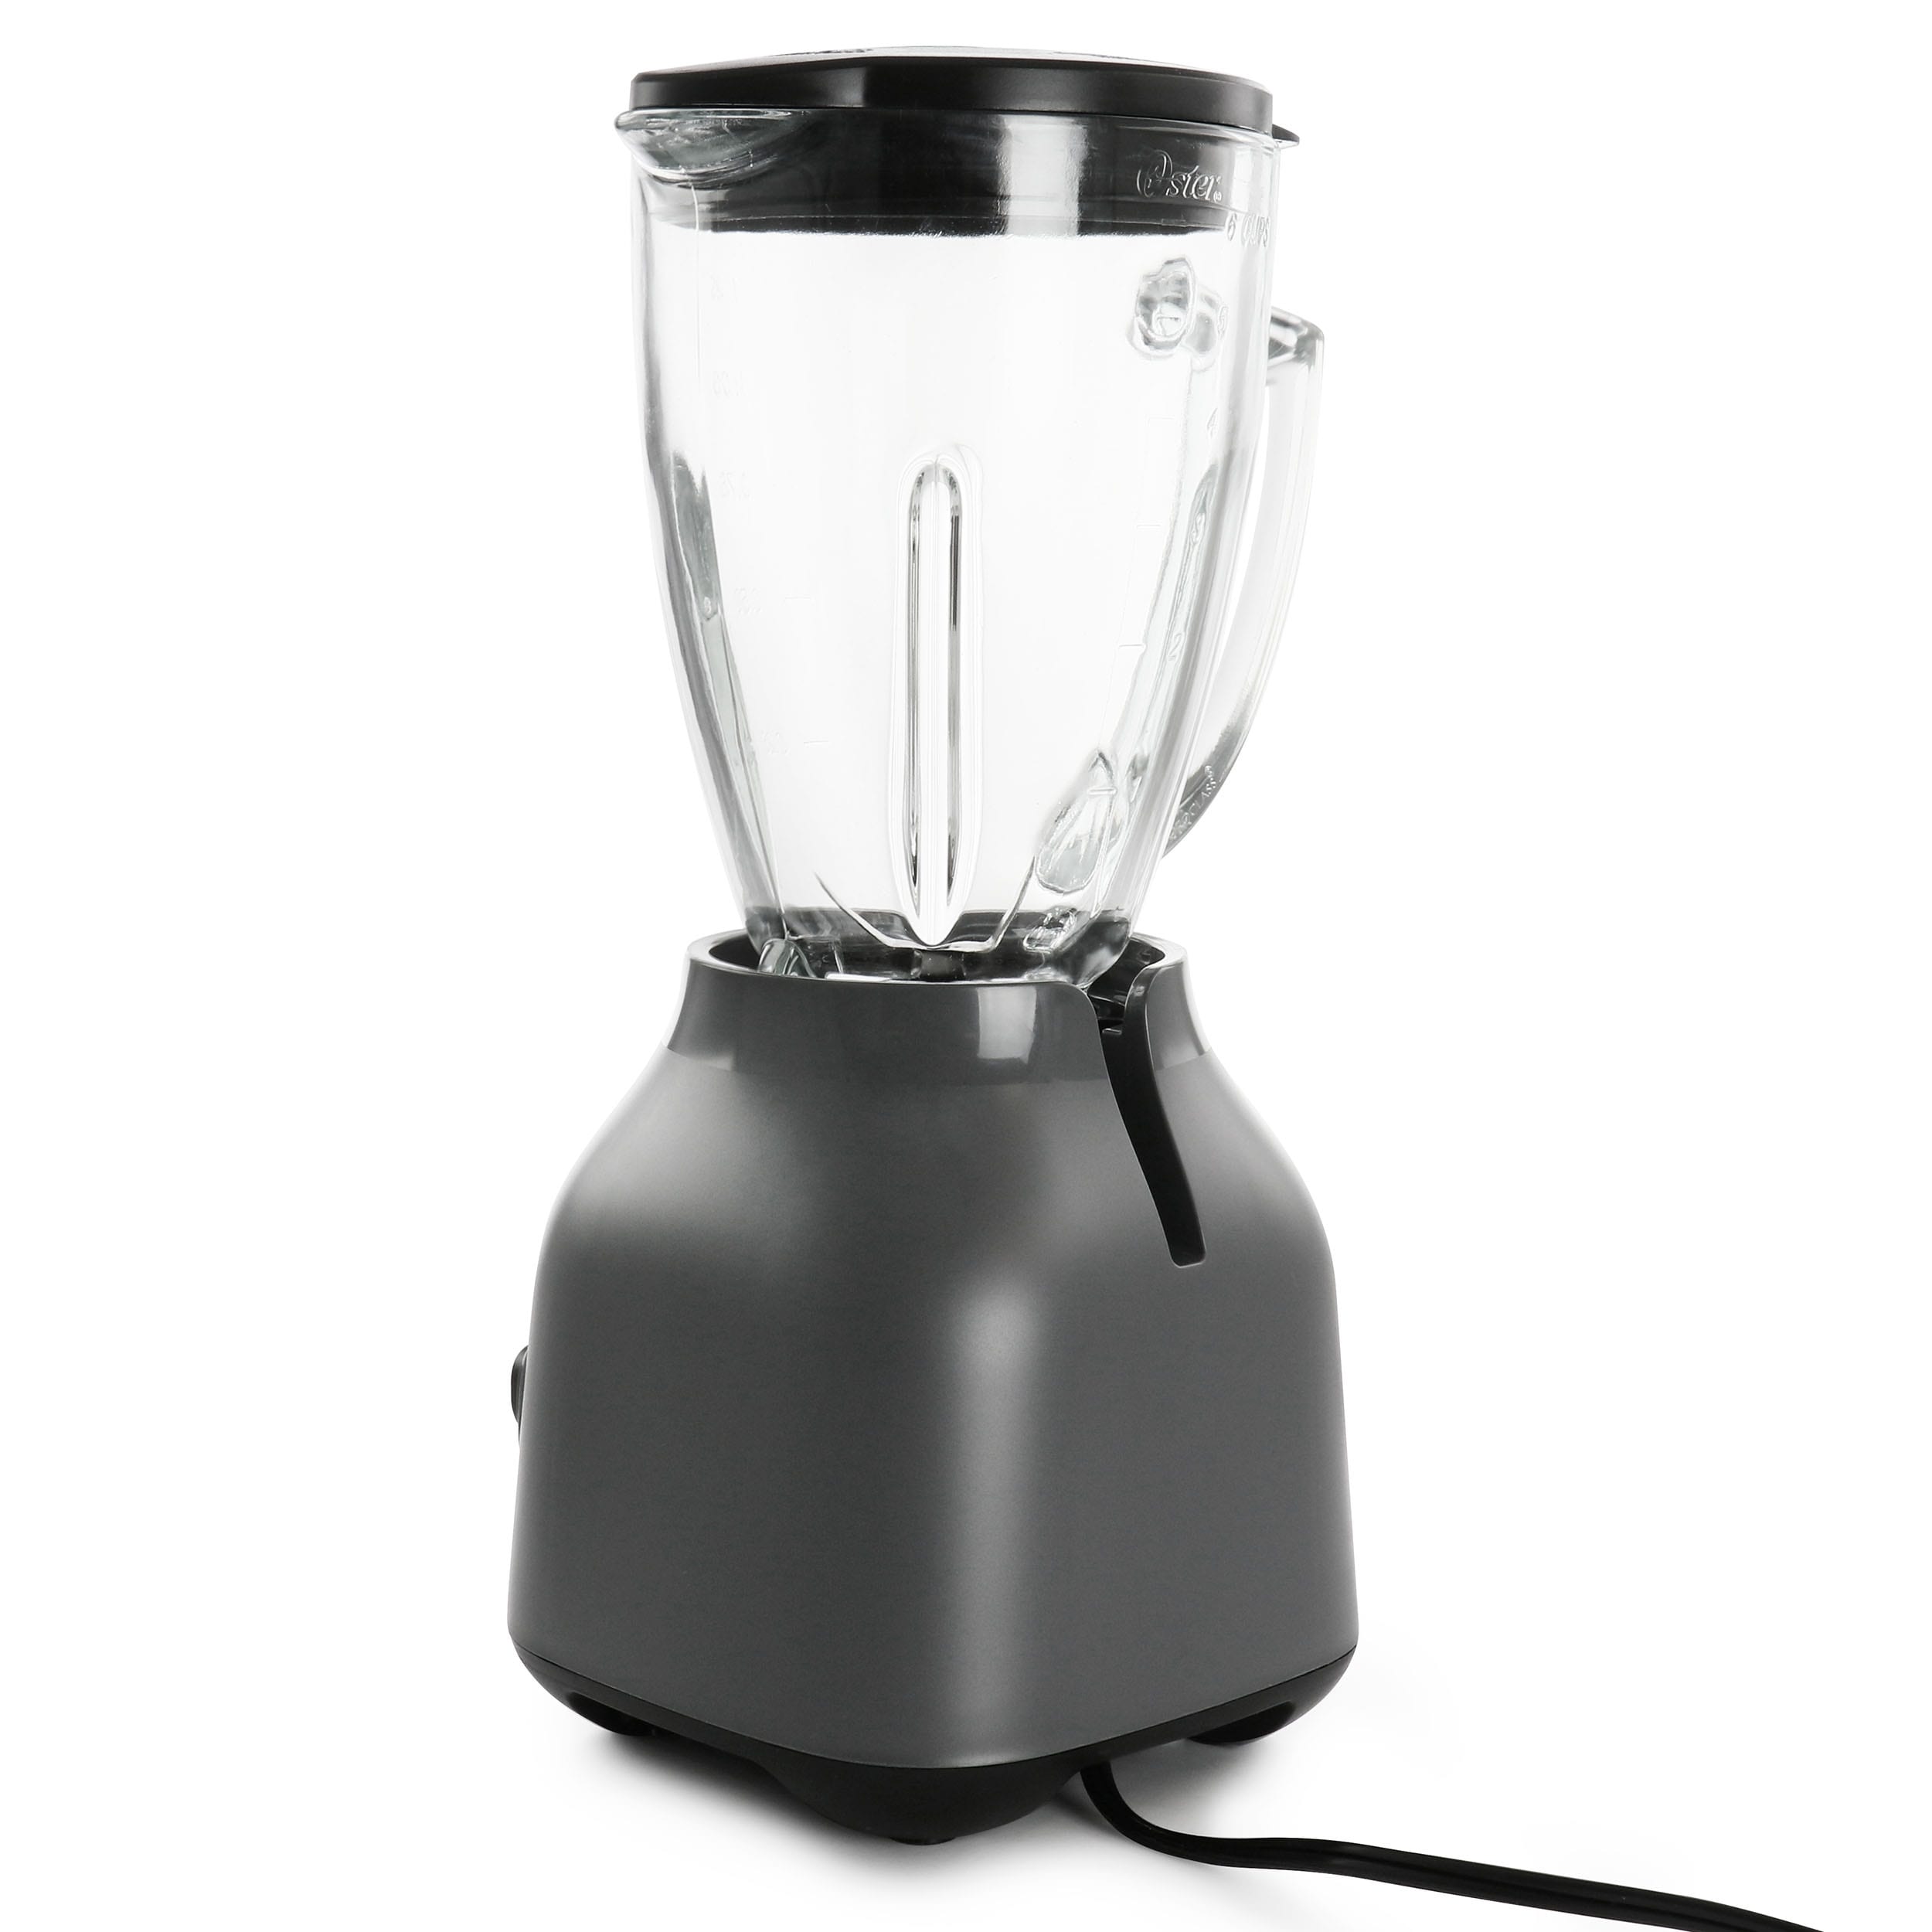 https://ak1.ostkcdn.com/images/products/is/images/direct/d4e1dbe2c91feba29e0c55e4d5395afe15950dc7/6-Cup-700-Watt-Blender-with-20-Ounce-Blend-N-Go-Cup.jpg